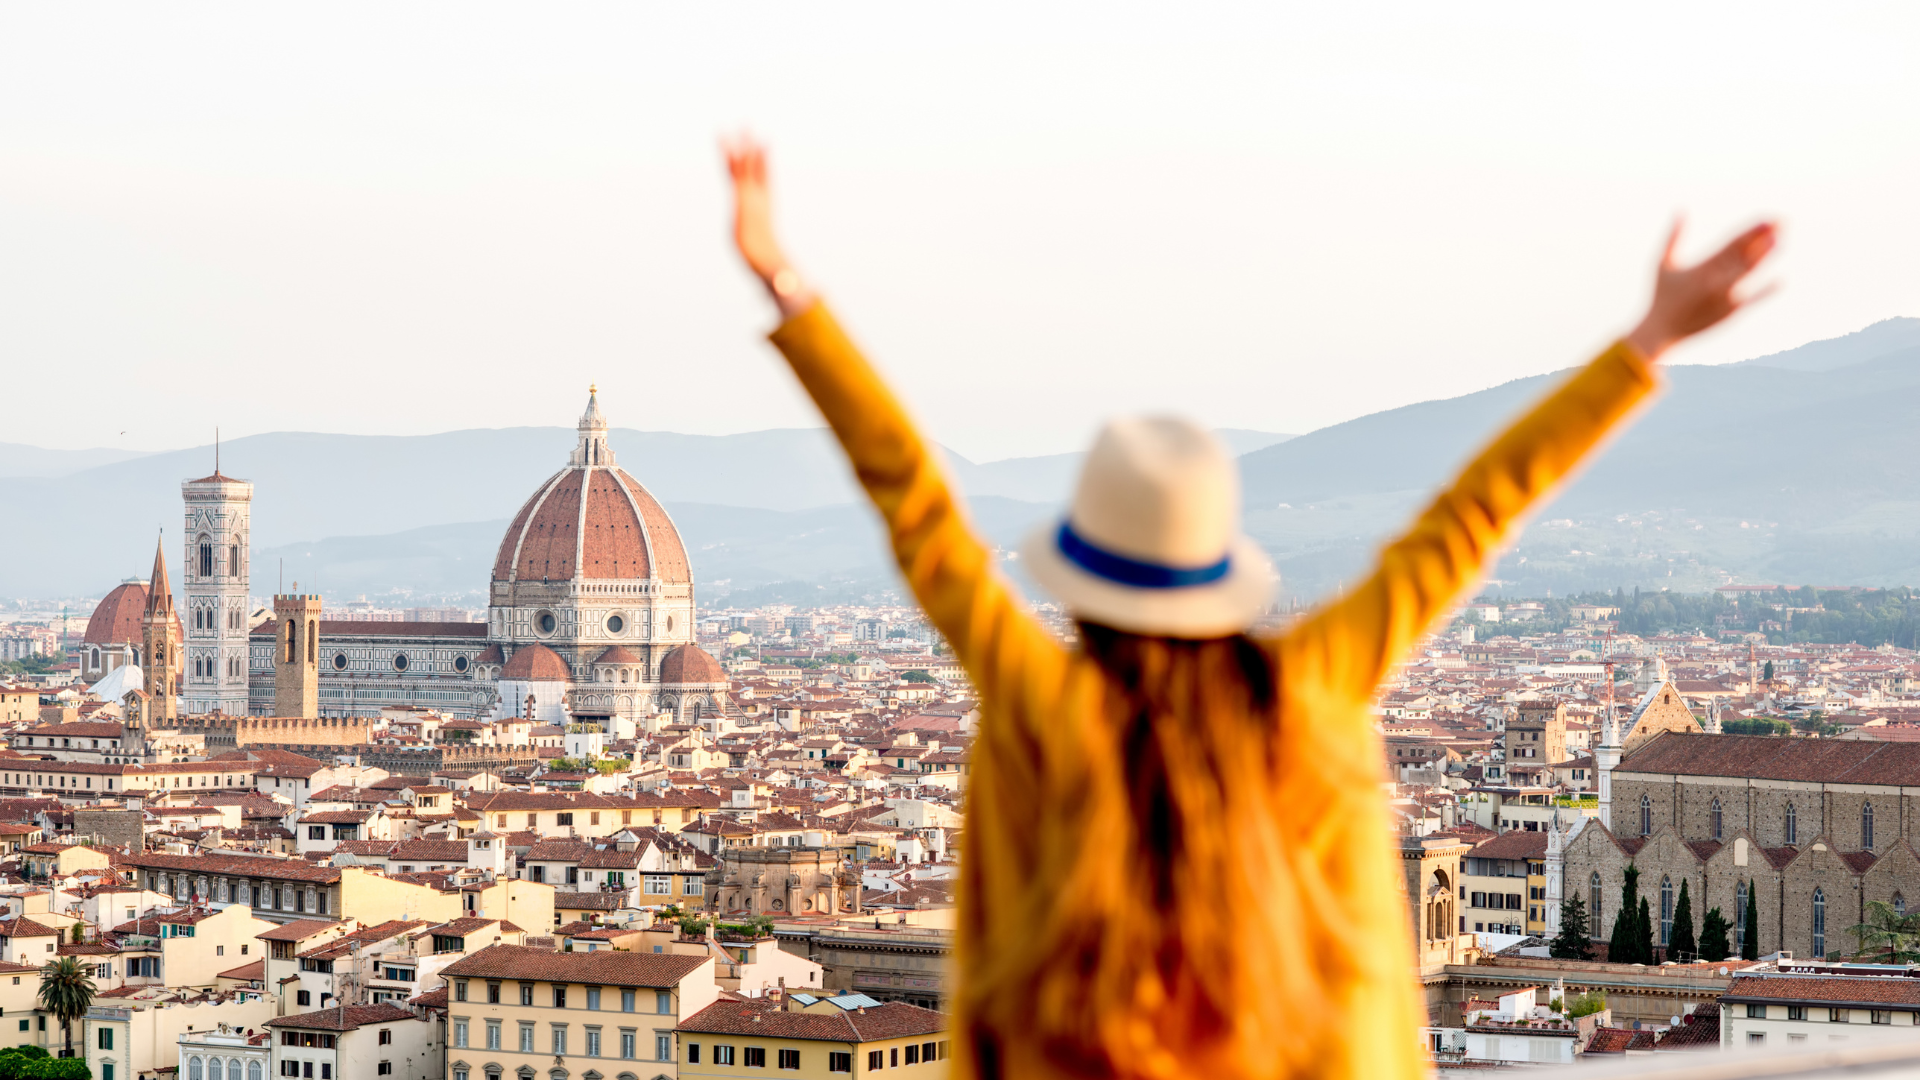 Tours in Florence